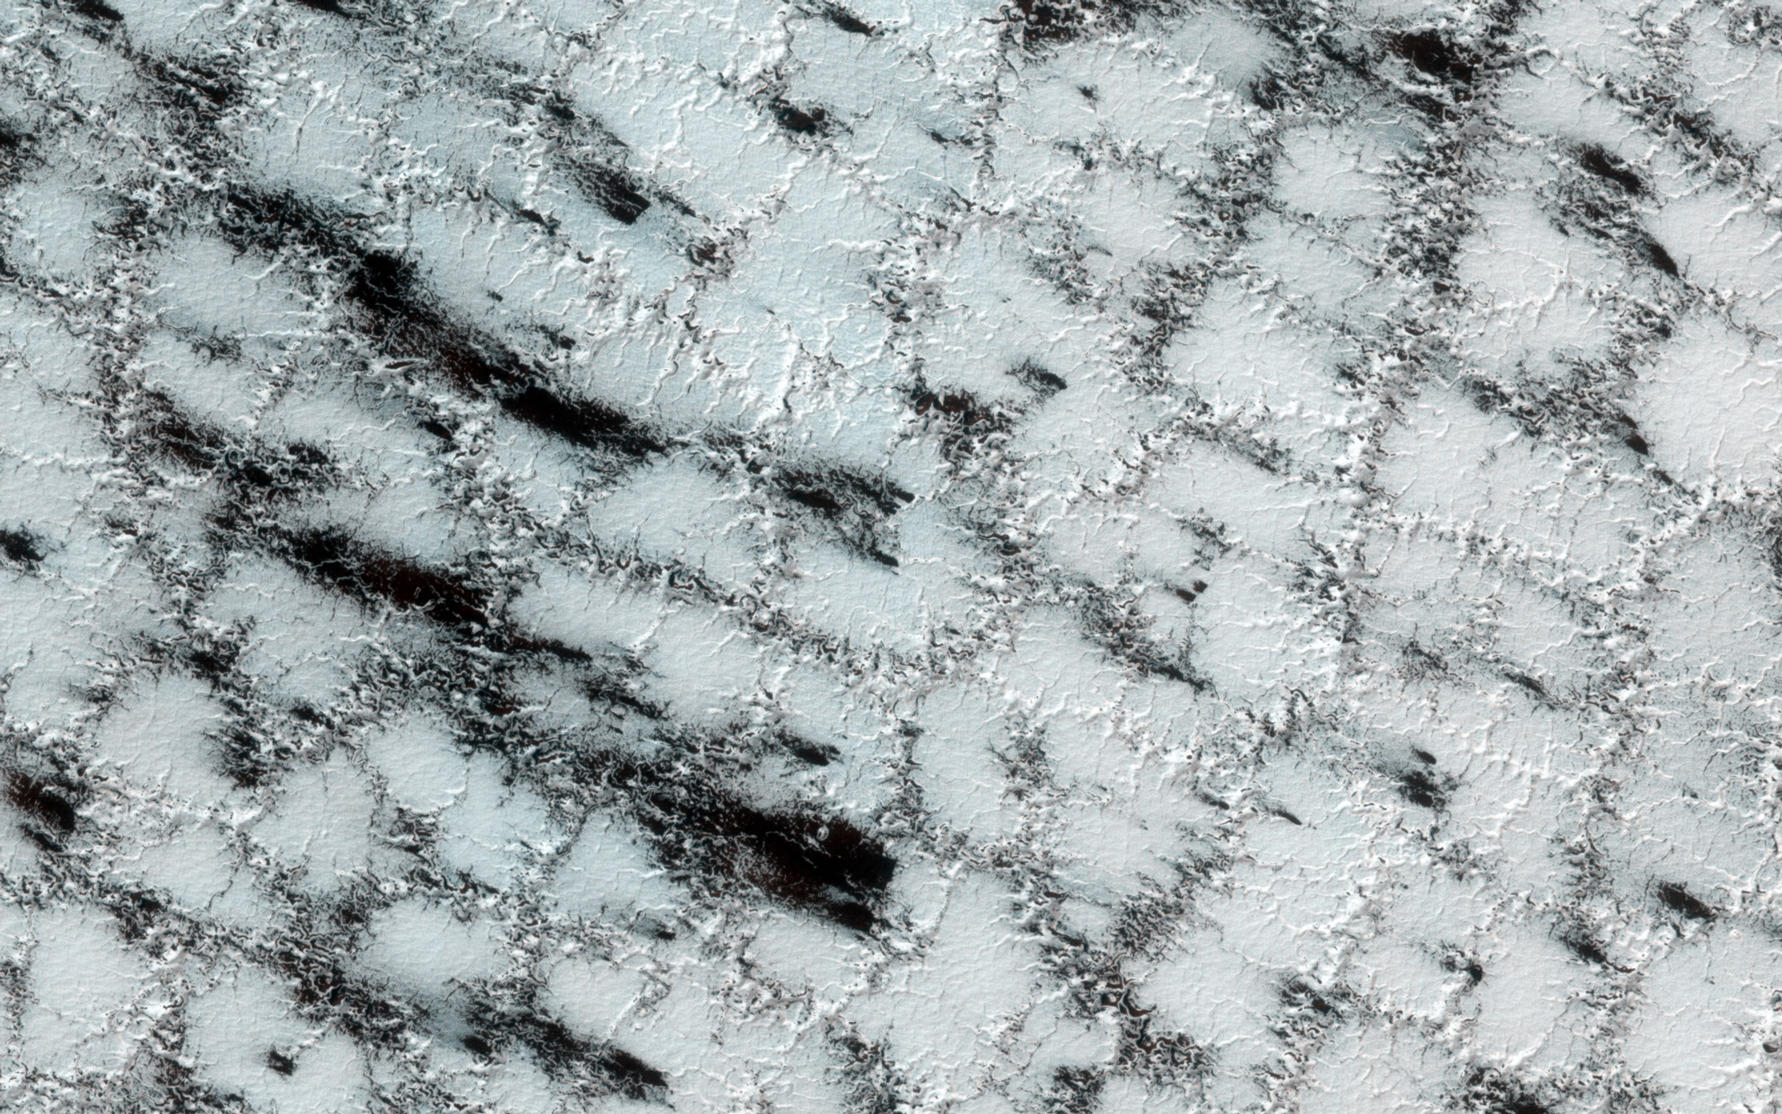 Although the season is late spring, carbon dioxide ice still covers much of the surface at this high latitude site.